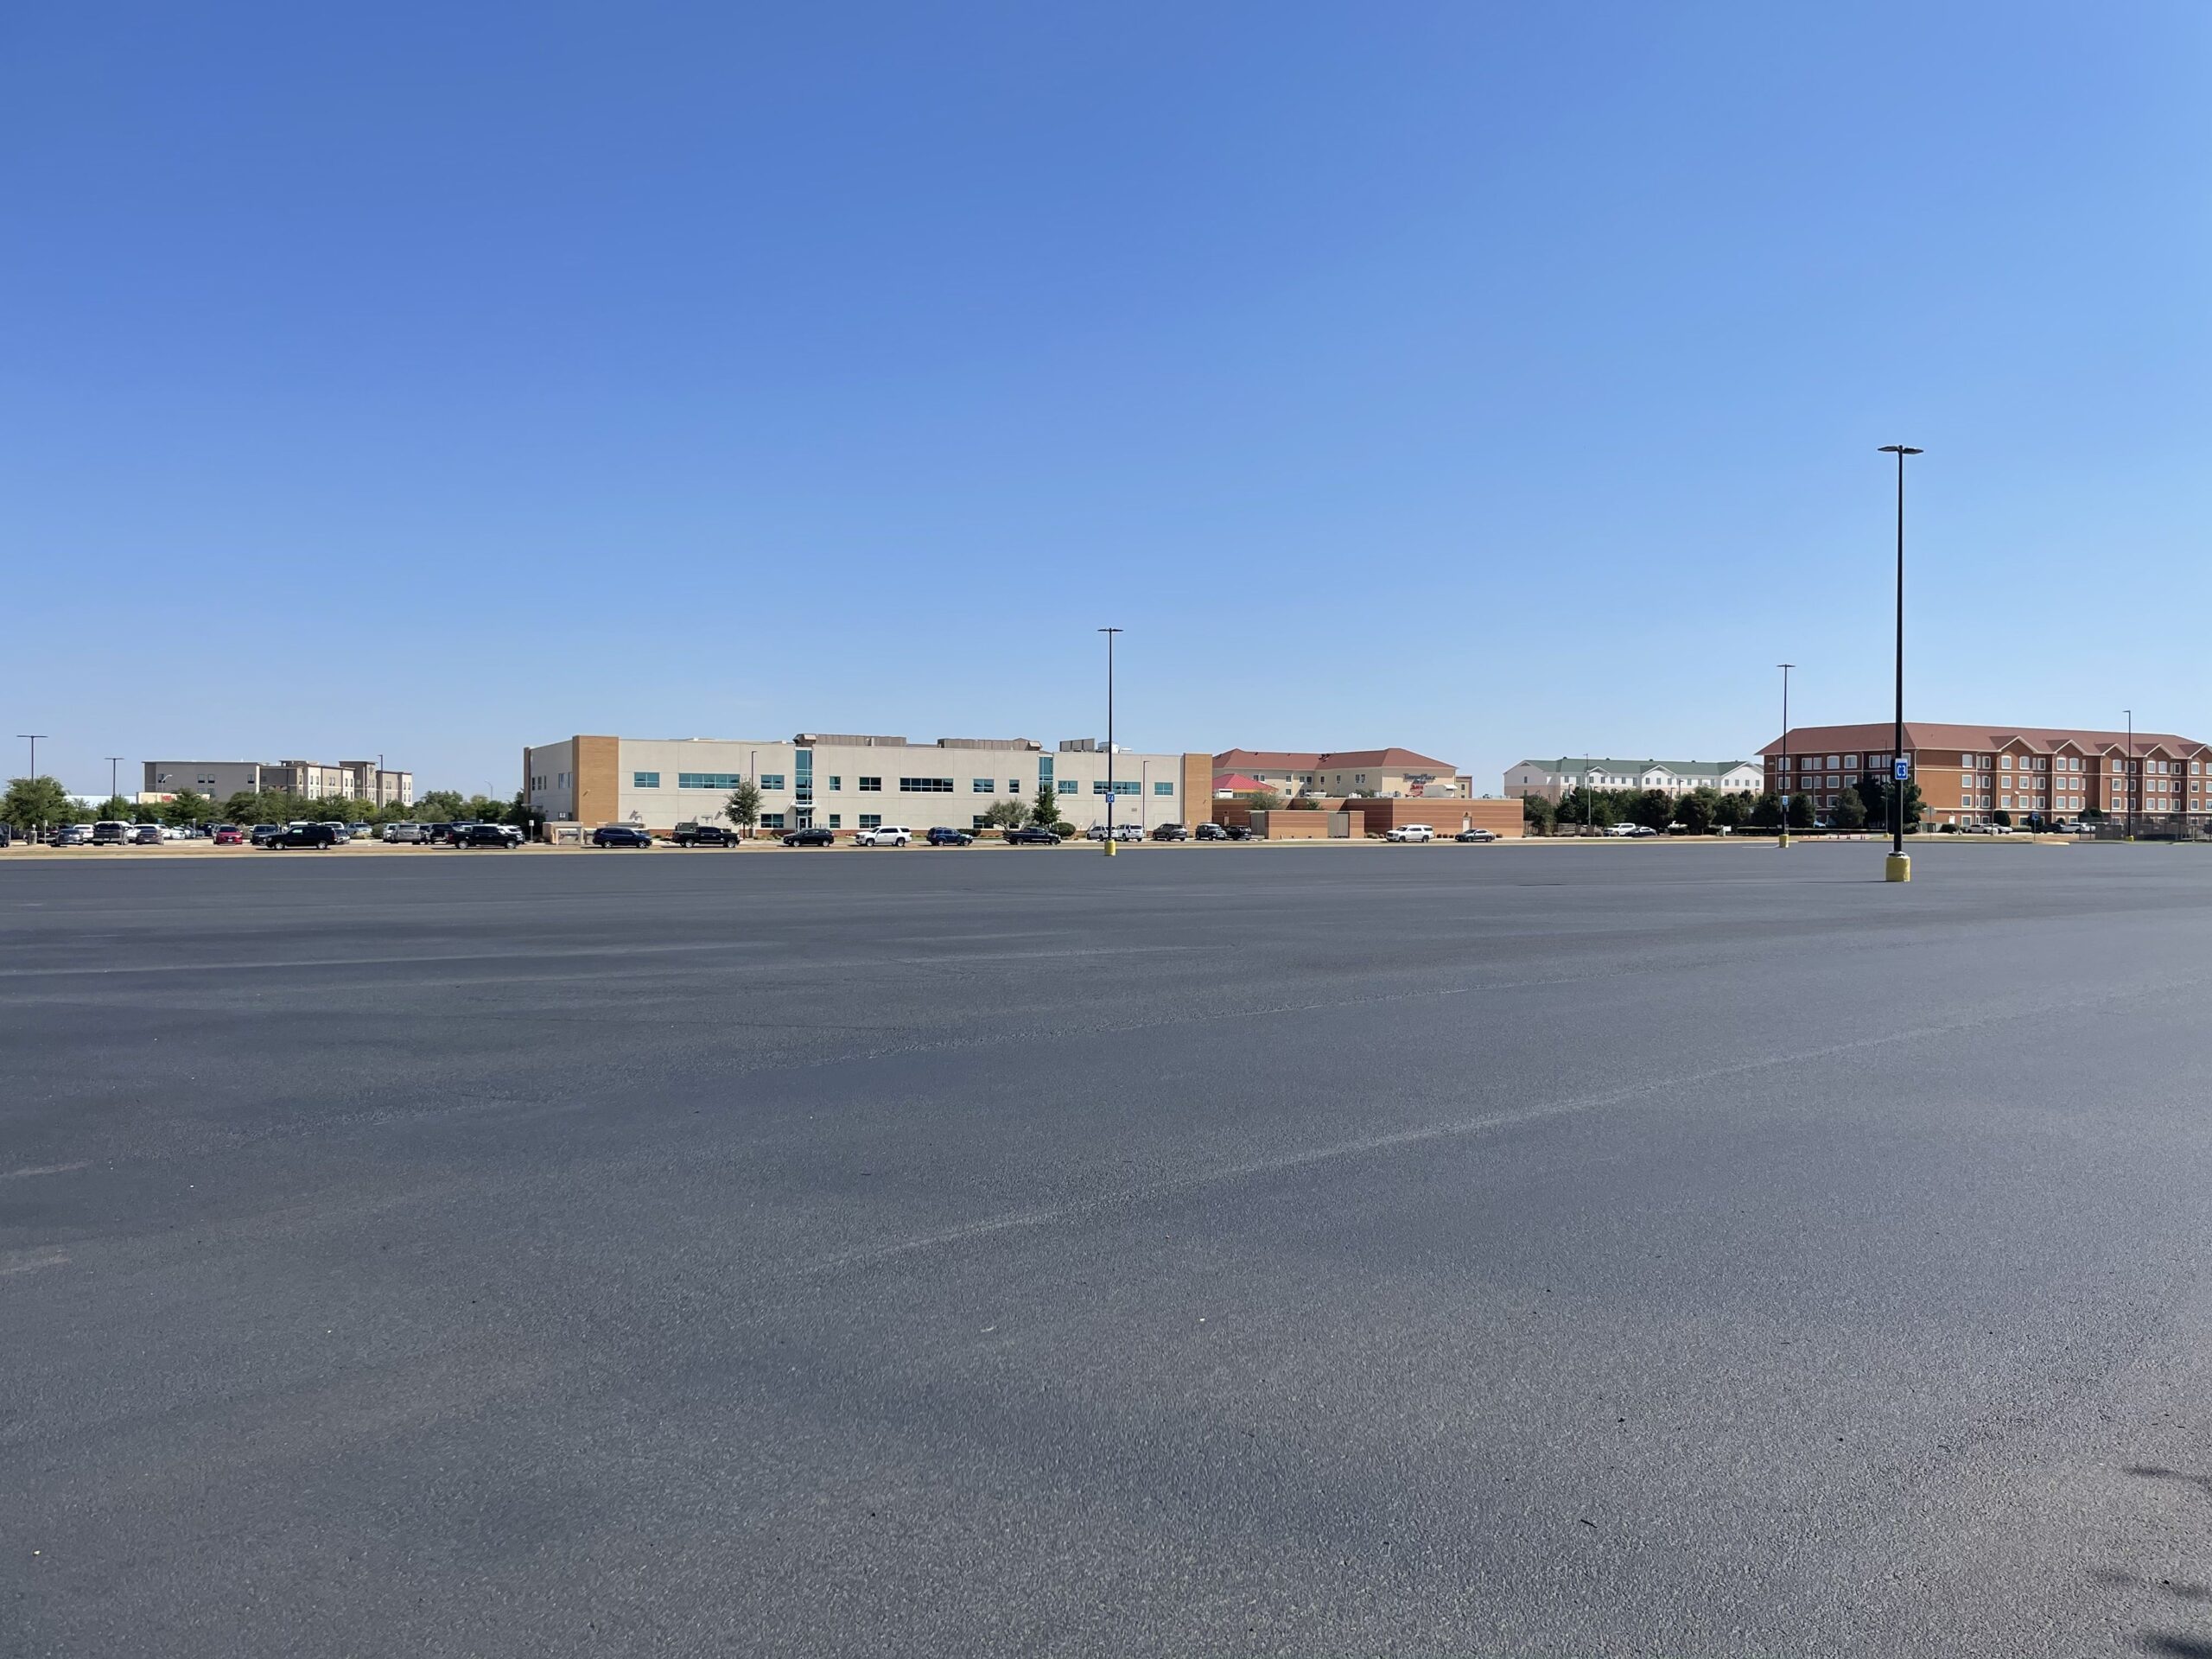 When and How Should You Maintain Your Asphalt Parking Lot?